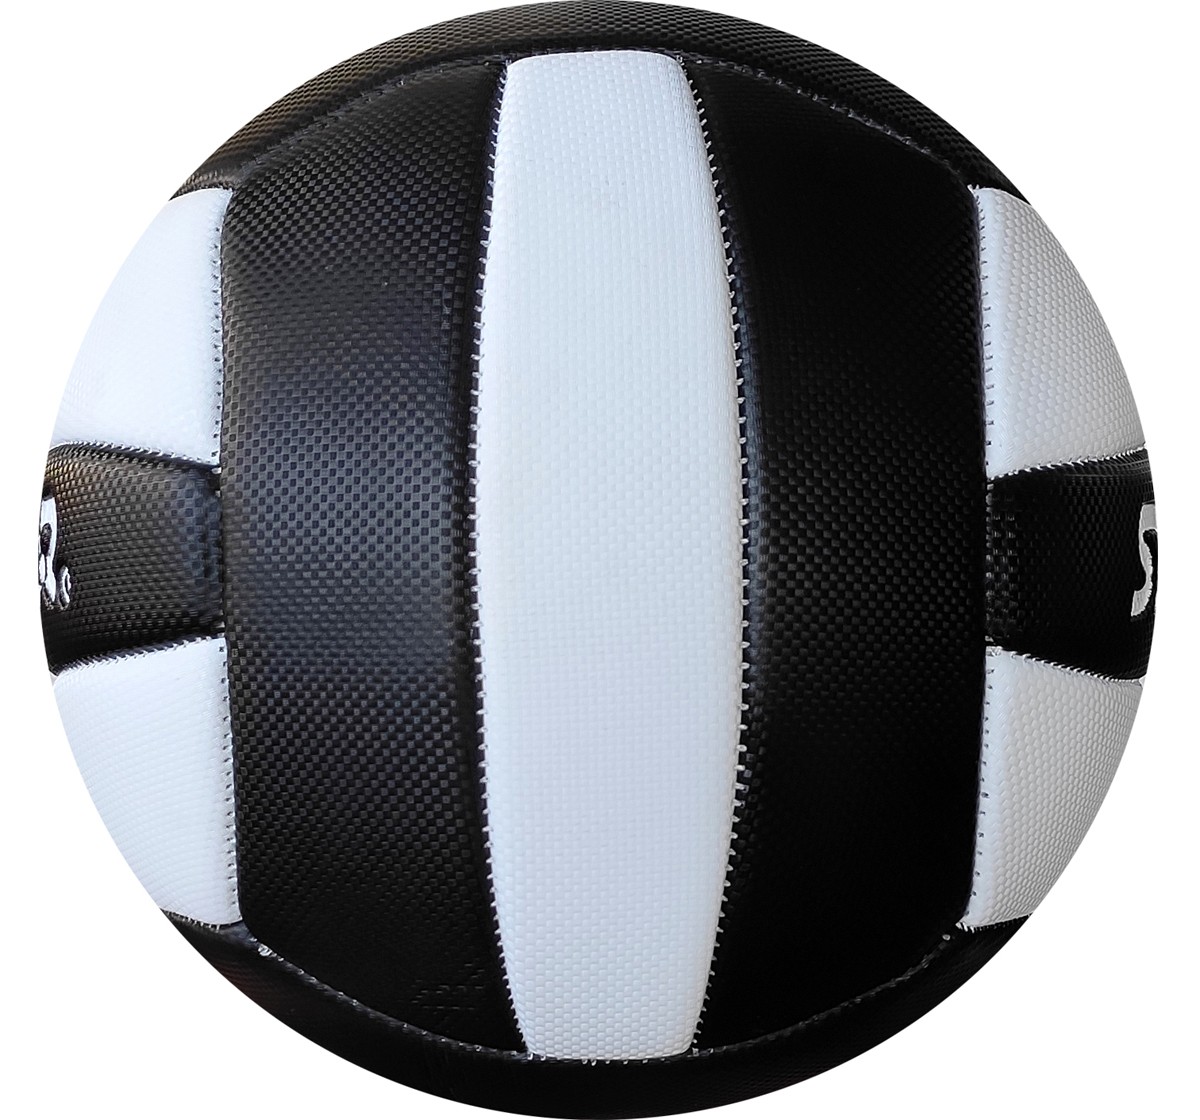 Starter Volleyball Soft touch